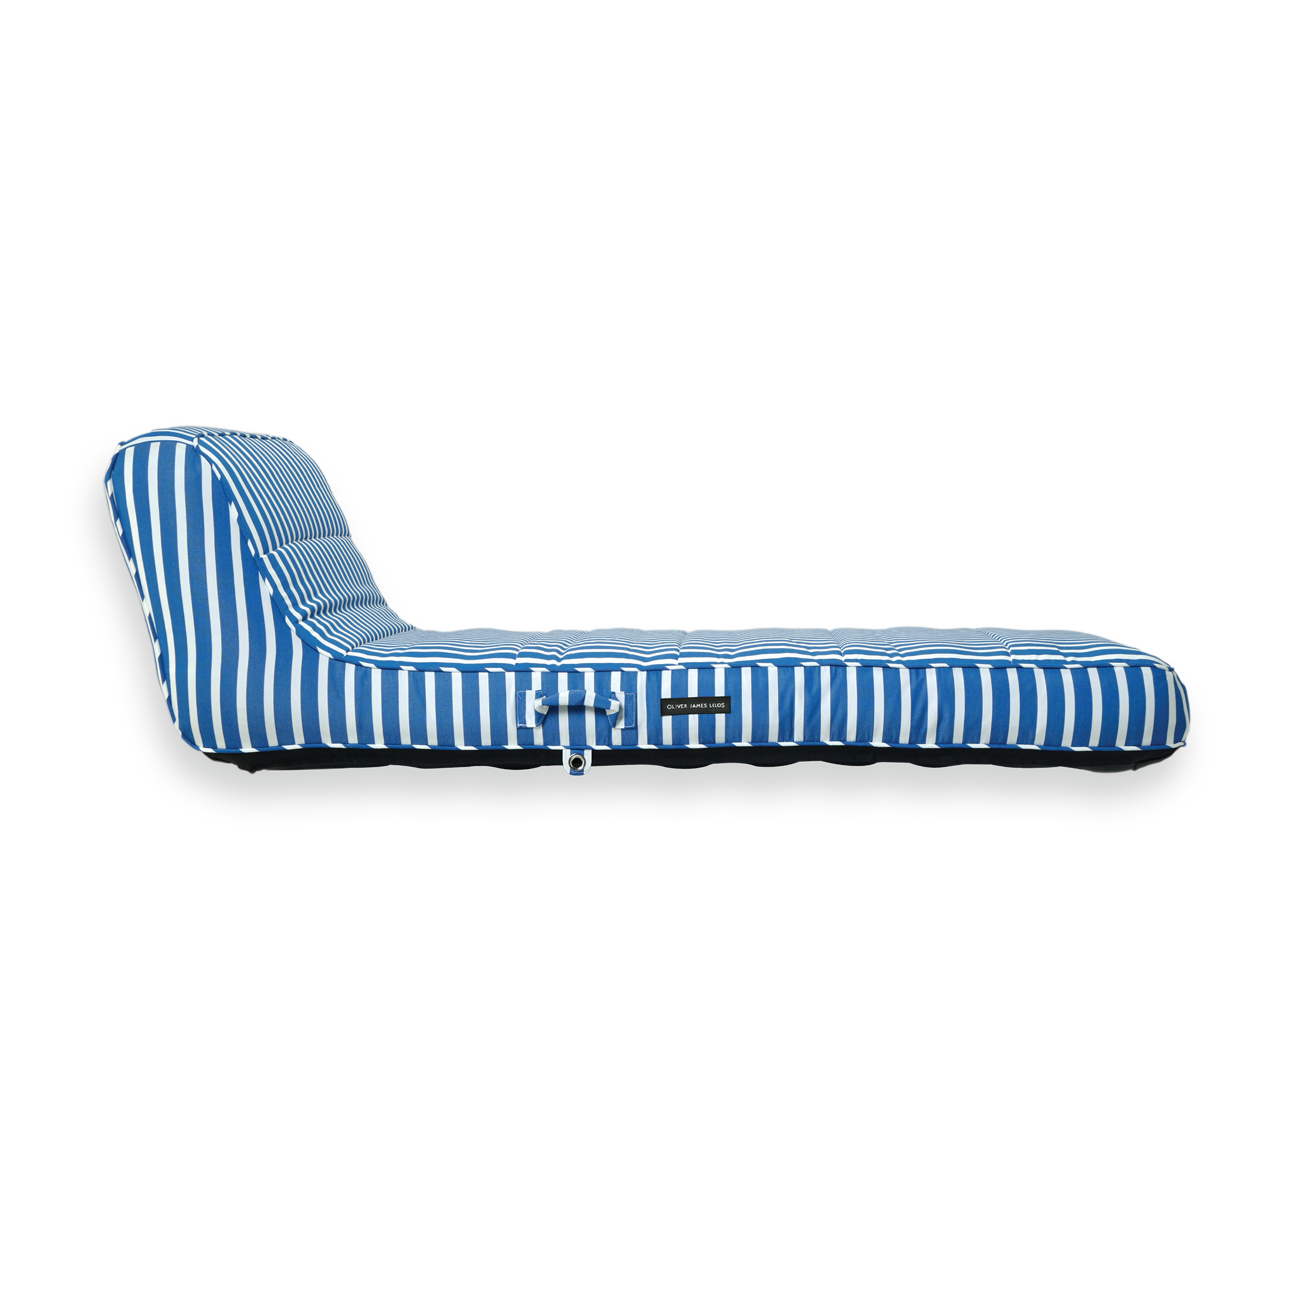 The side of a luxury pool float in a blue and white striped fabric.